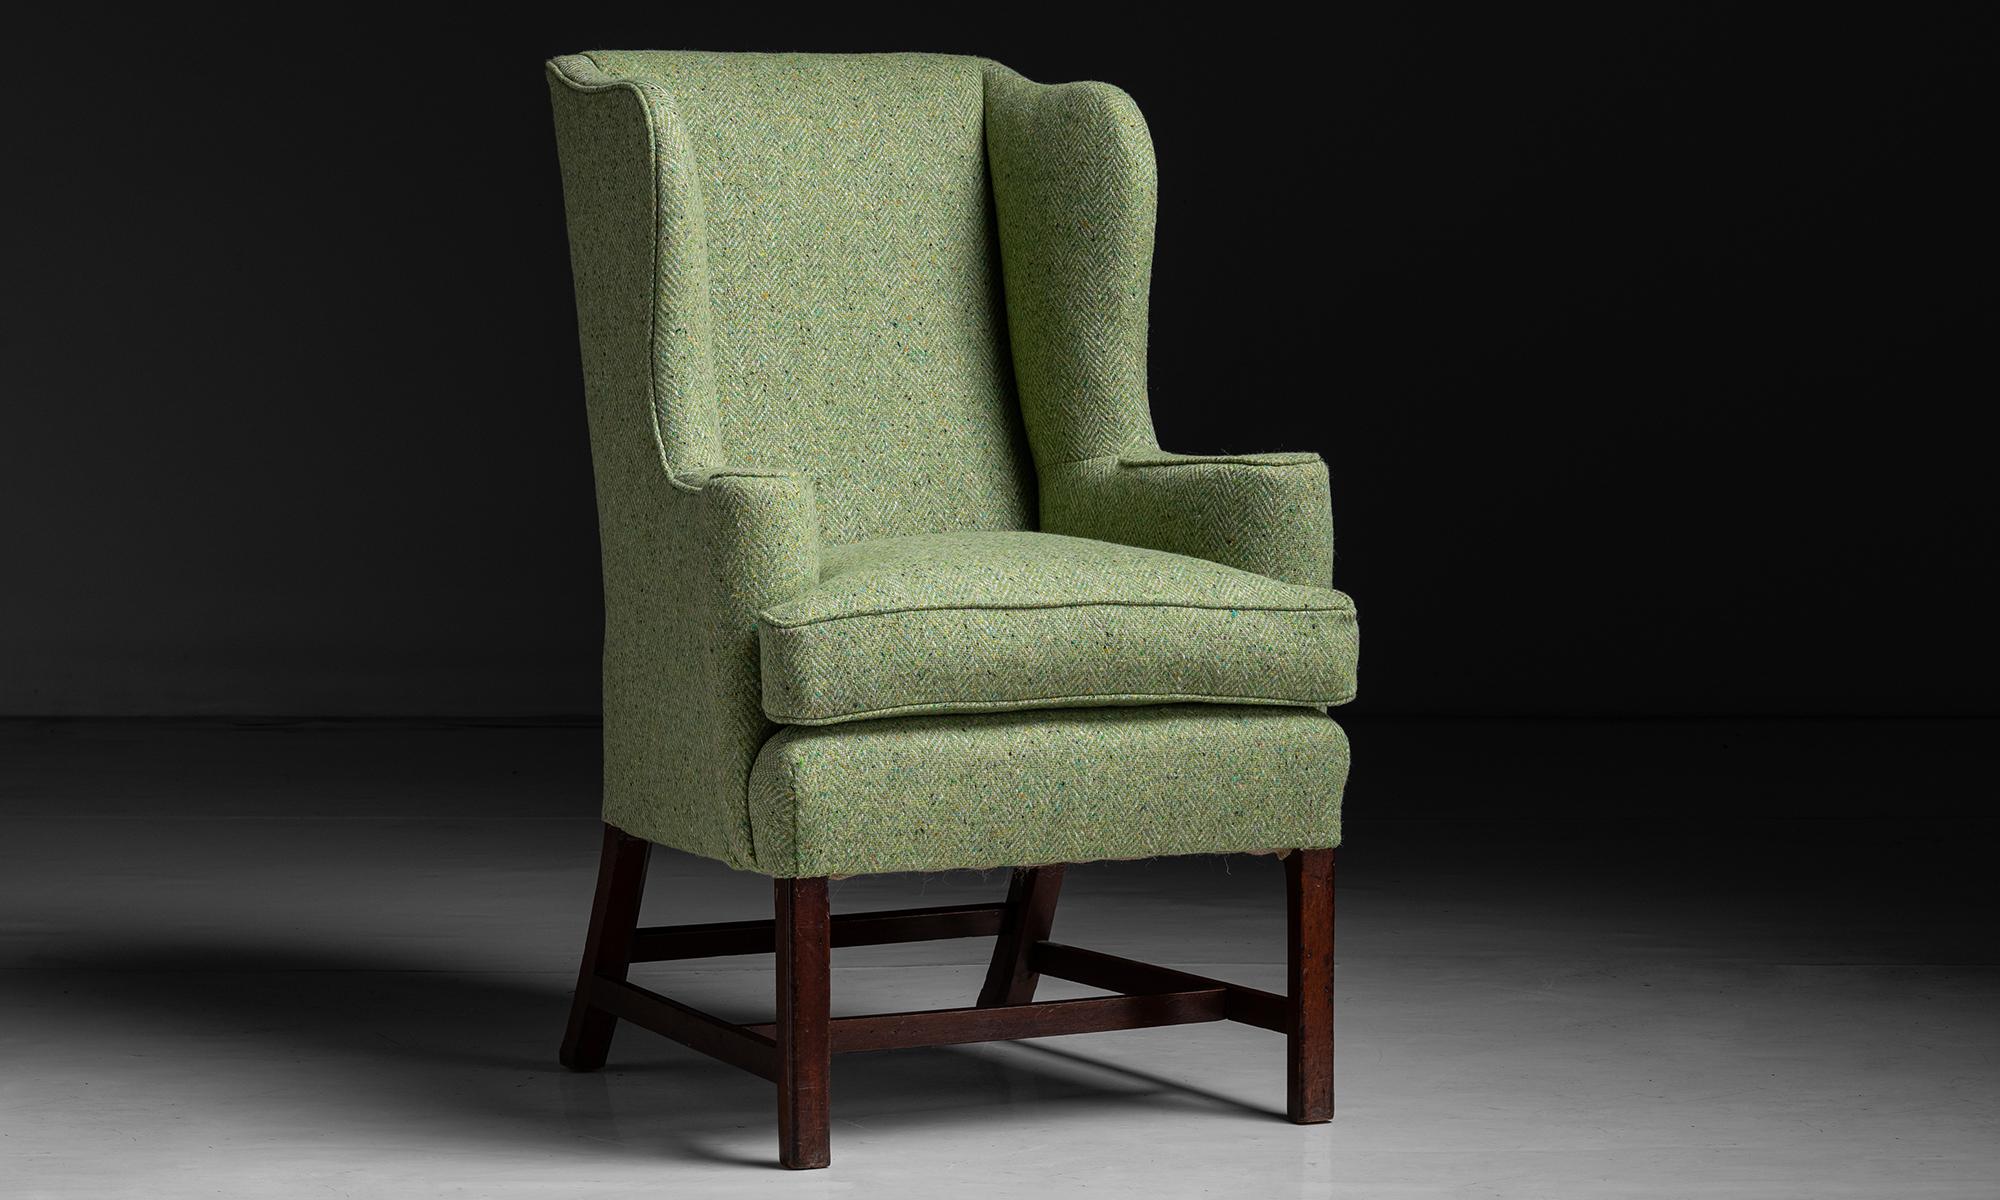 Wingback Chair in Tweed by Pierre Frey

England circa 1760

George III chair, newly upholstered on original mahogany base.

Measures 28.5”w x 29”d x 46.5”h x 24”seat